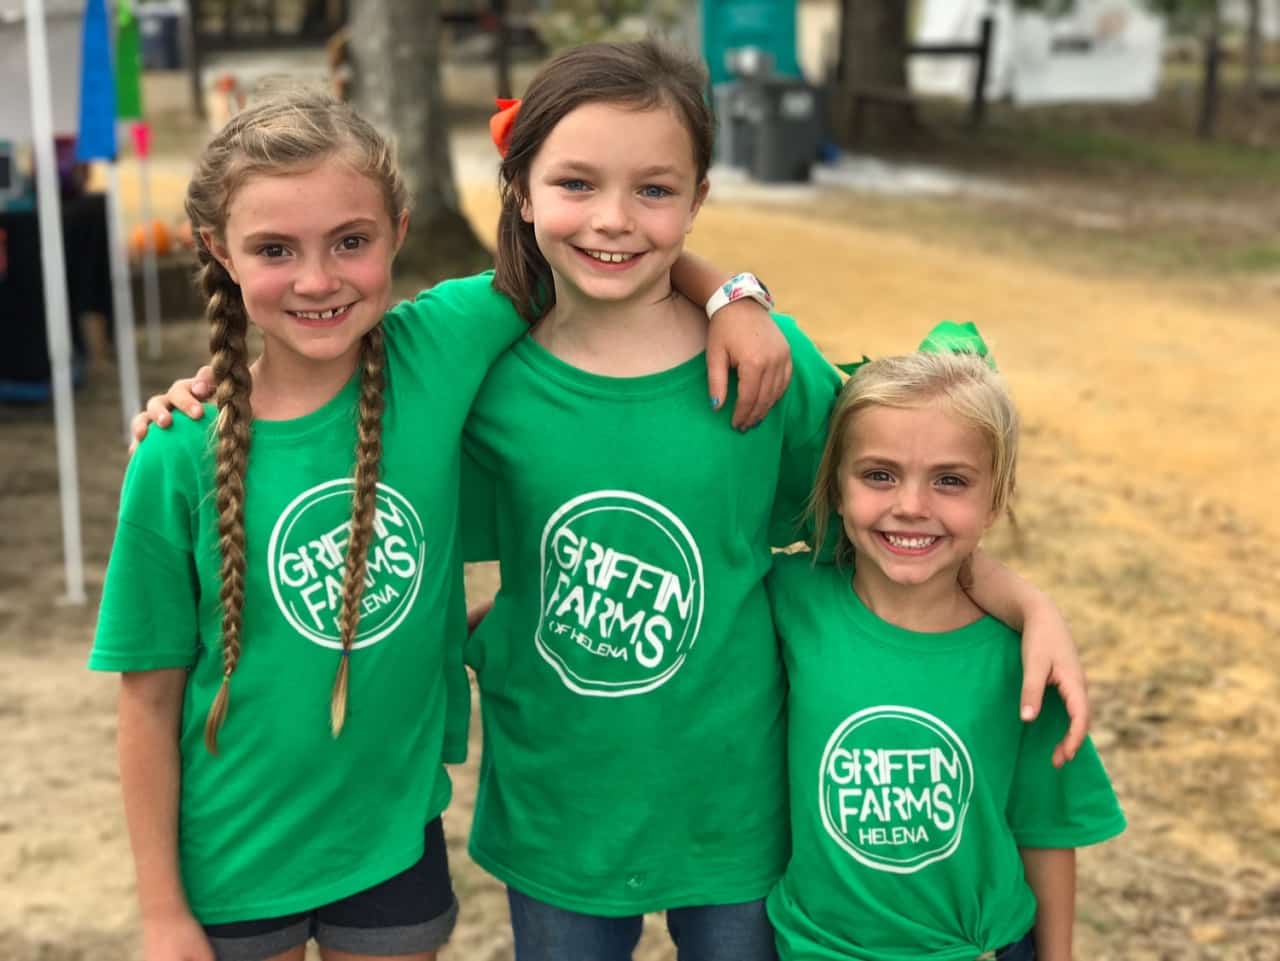 Griffin Farms of Helena GIRLS PIC Top pumpkin patches around Birmingham